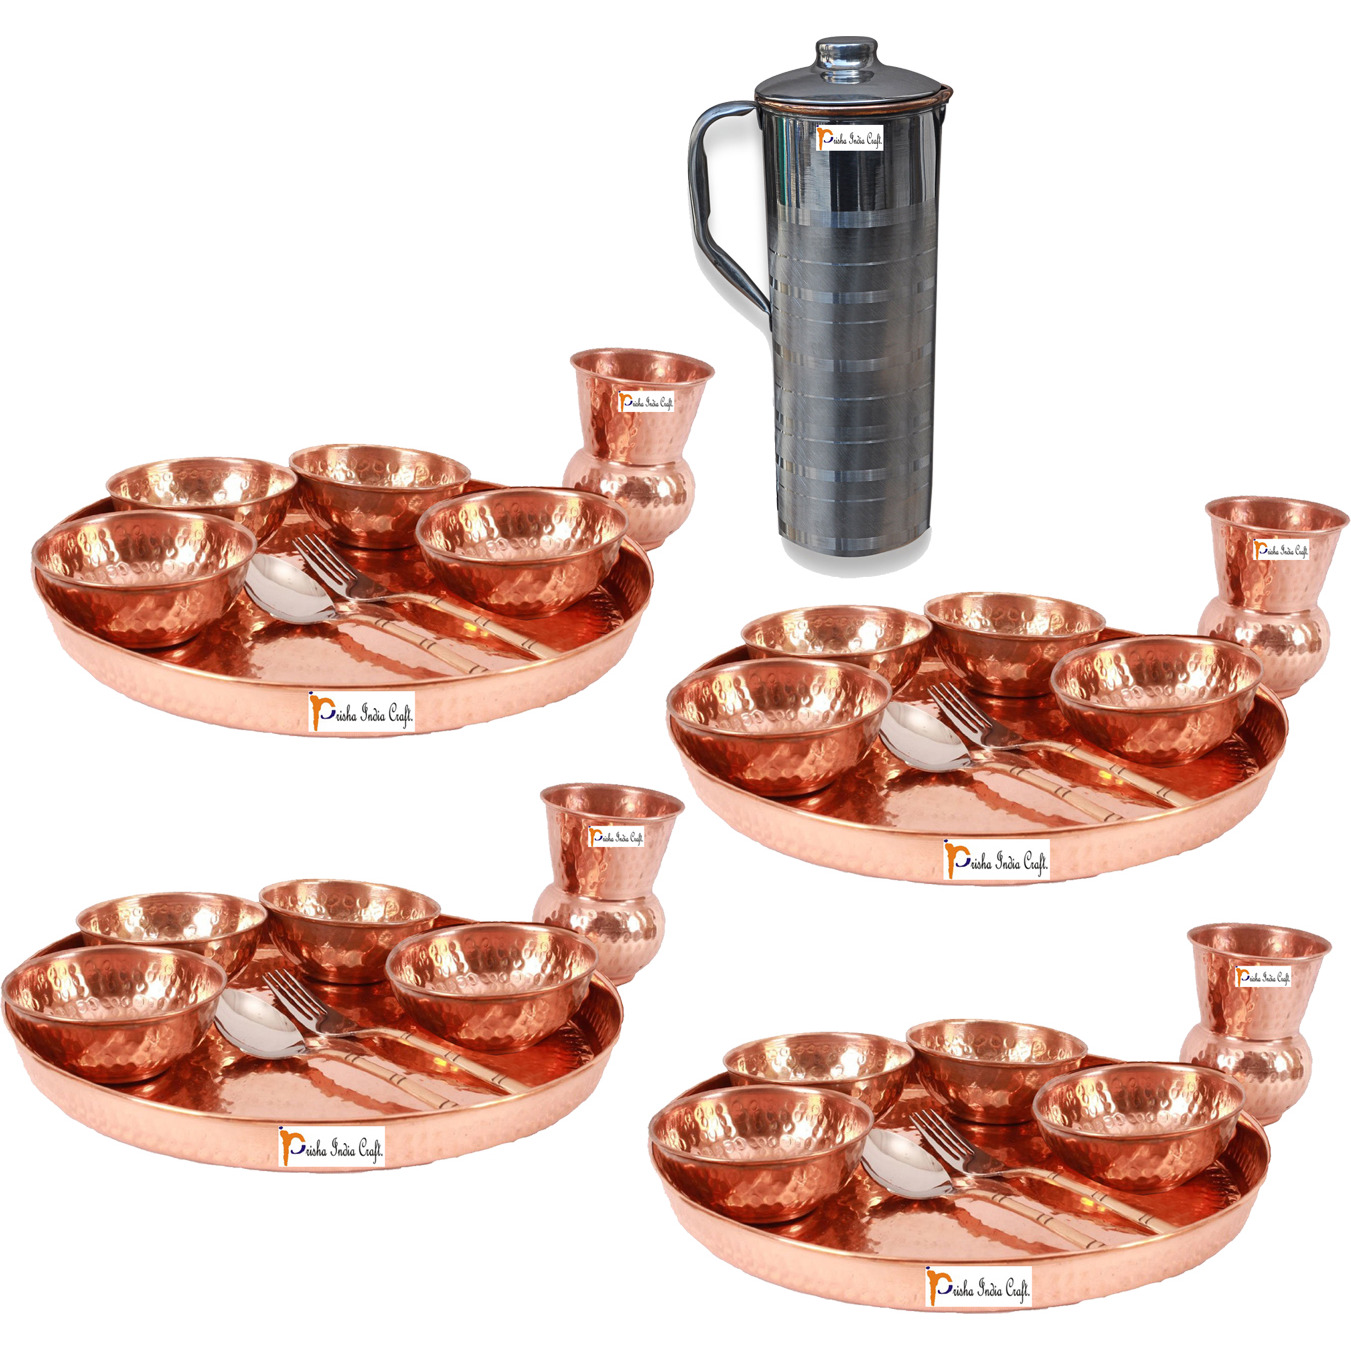 Prisha India Craft B. Set of 4 Dinnerware Traditional 100% Pure Copper Dinner Set of Thali Plate, Bowls, Glass and Spoon, Dia 12  With 1 Luxury Style Stainless Steel Copper Pitcher Jug - Christmas Gift